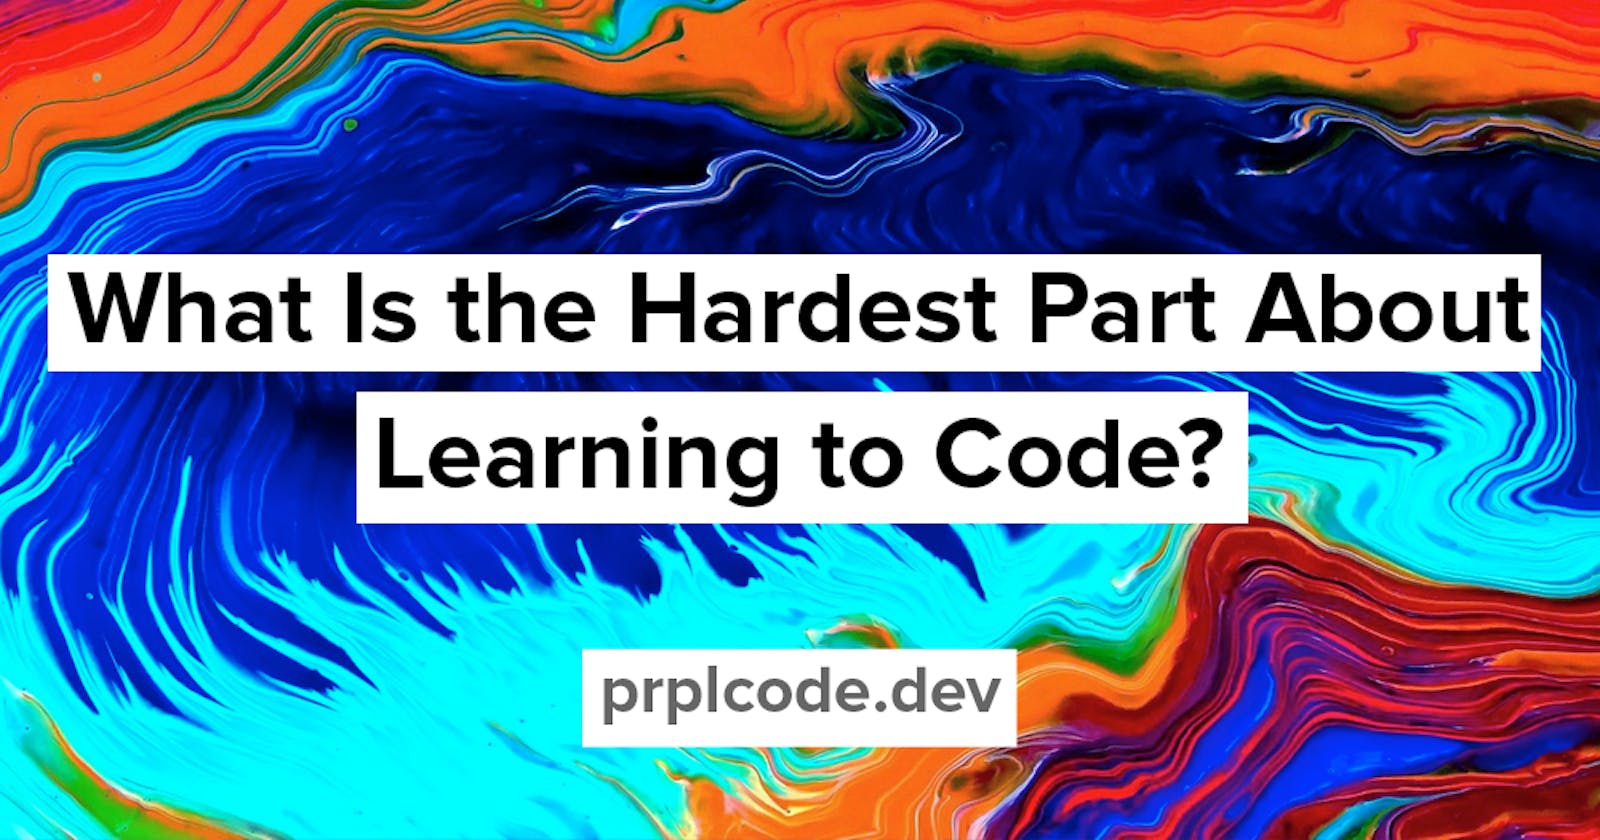 What Is the Hardest Part About Learning to Code?